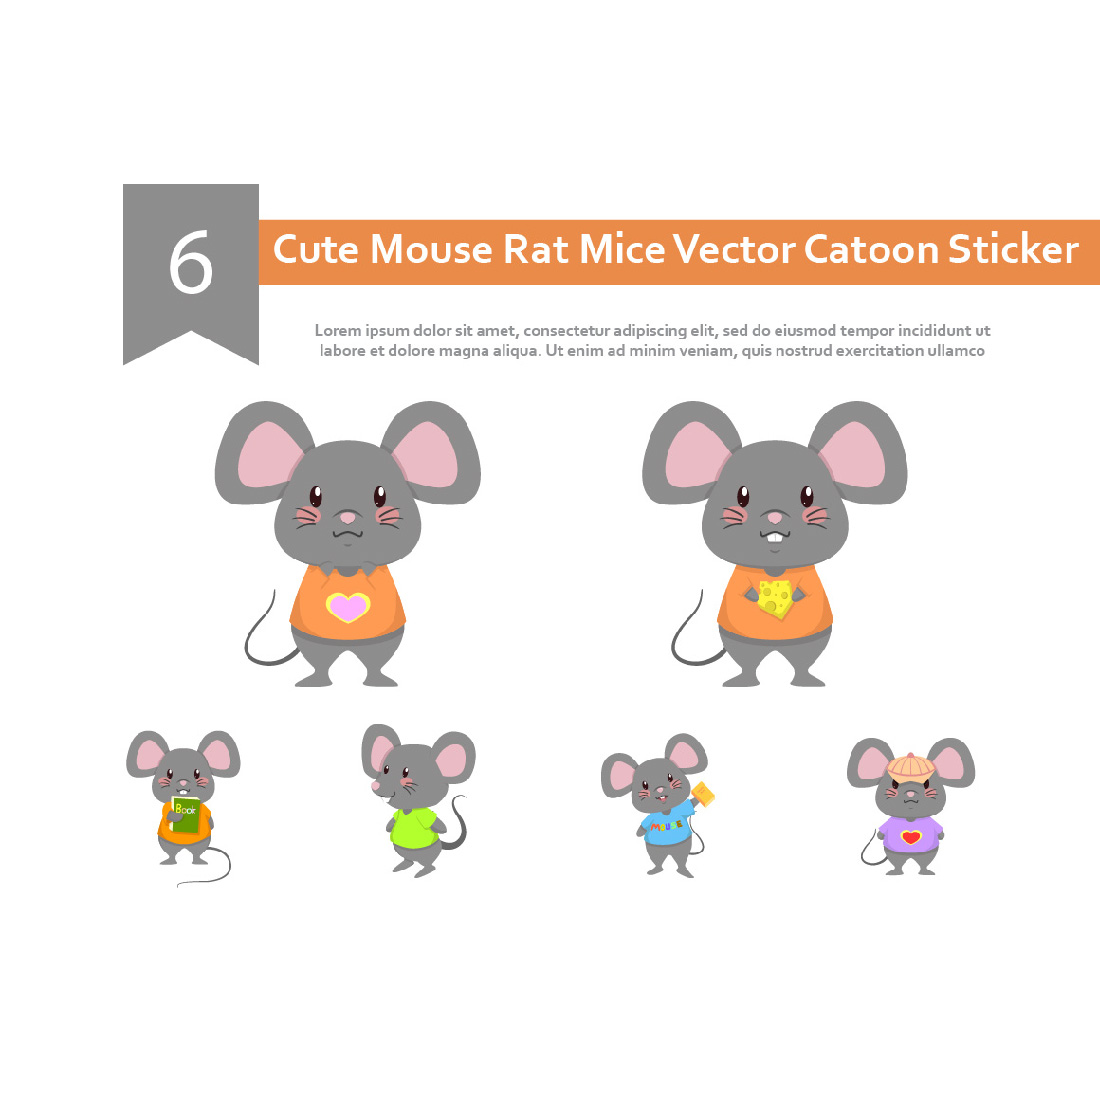 Different Variations of Cute Mouse Vector Cartoon Sticker.